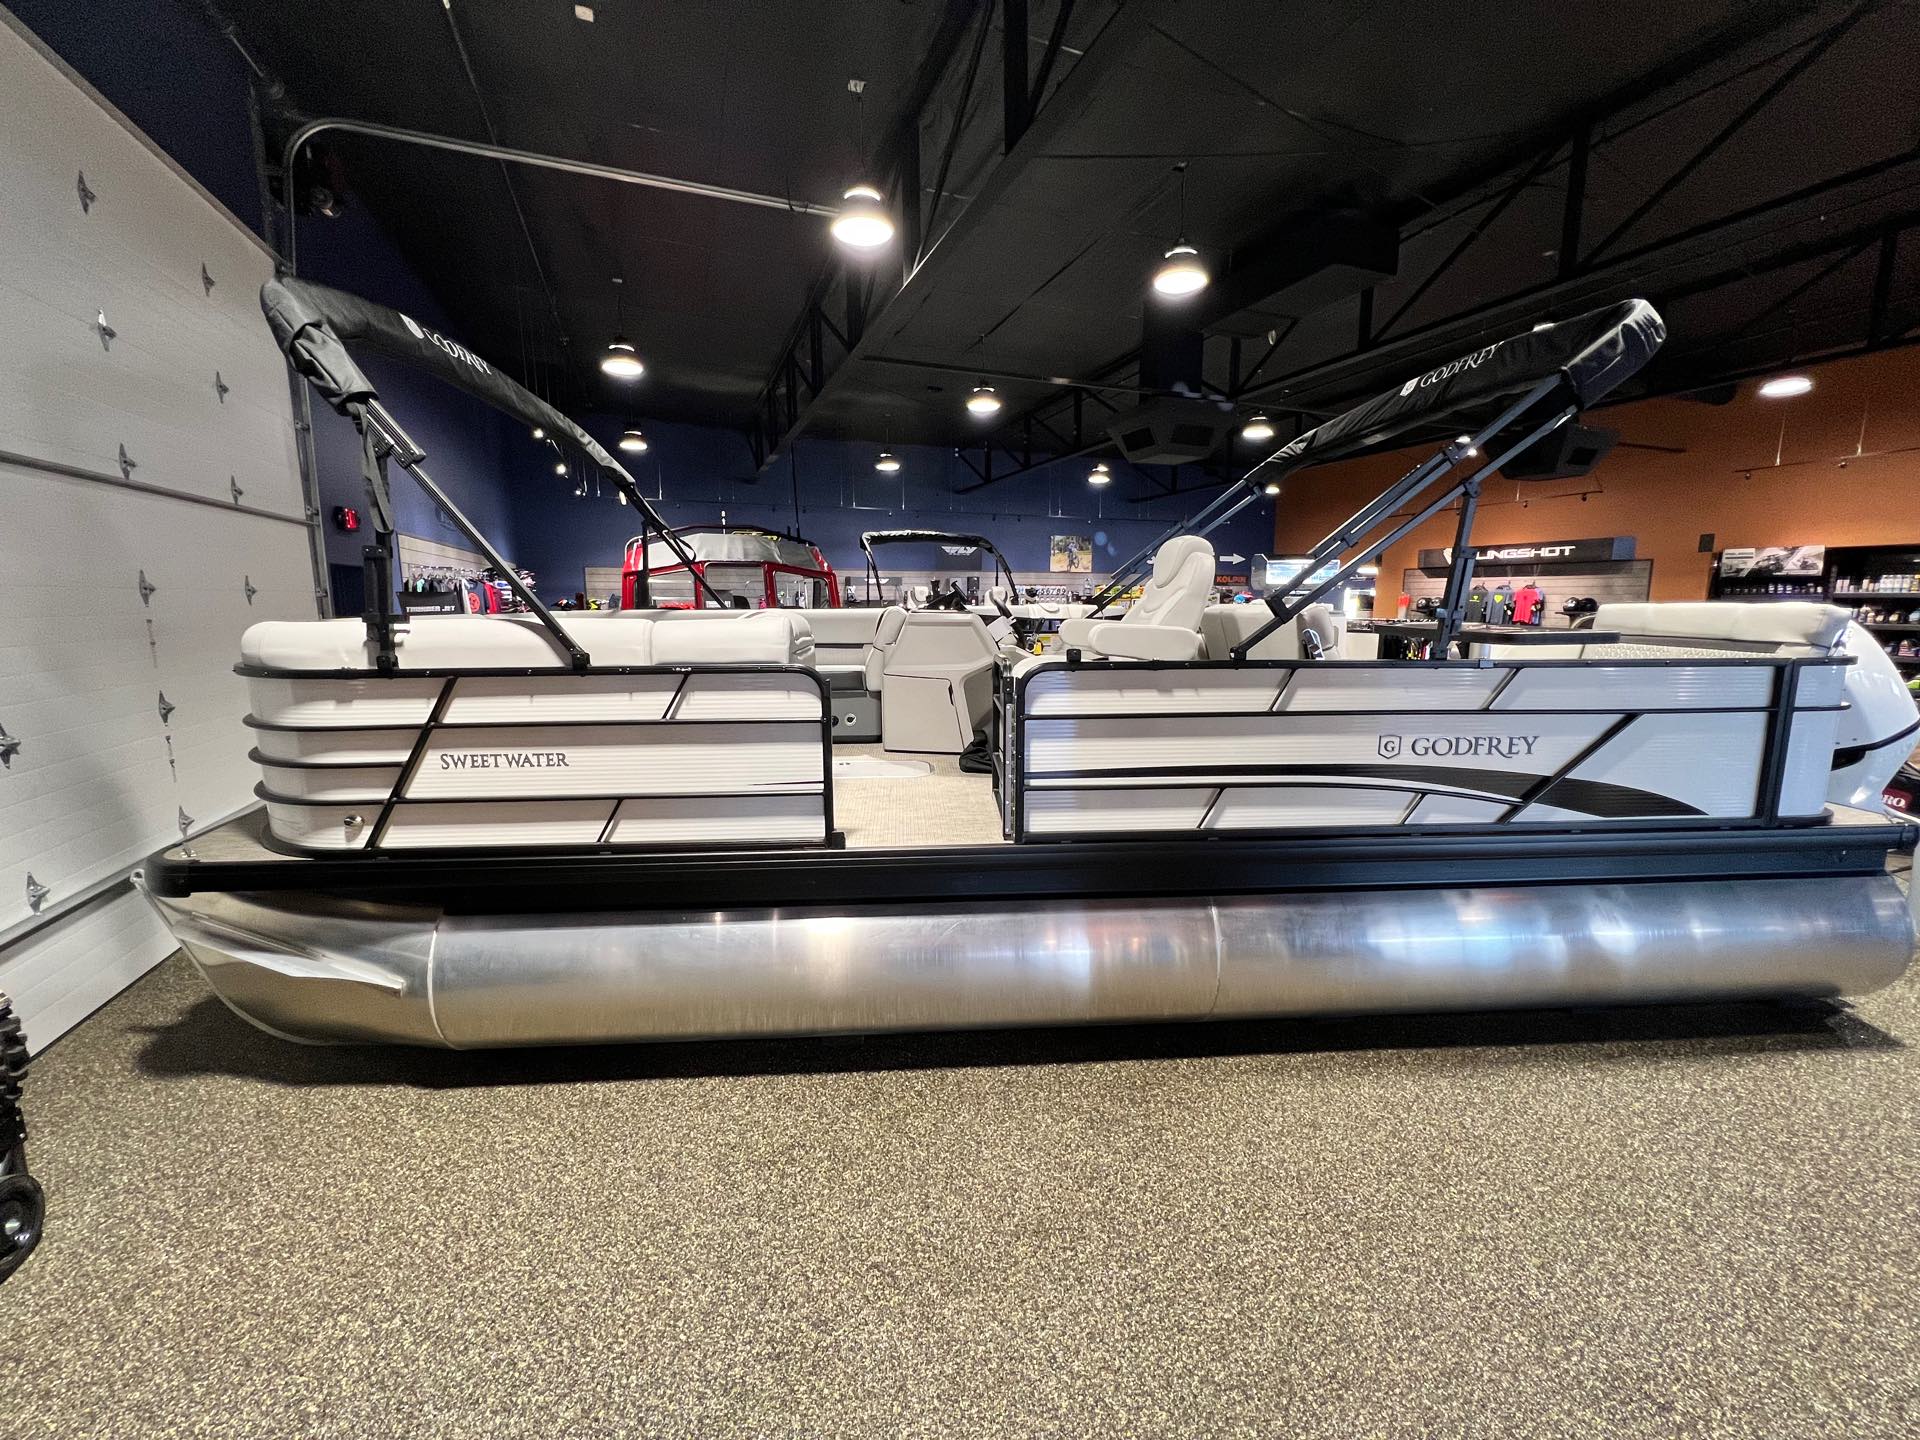 2022 Godfrey Pontoons Sweetwater 2386 Entertainment SW 2386 DT at Guy's Outdoor Motorsports & Marine